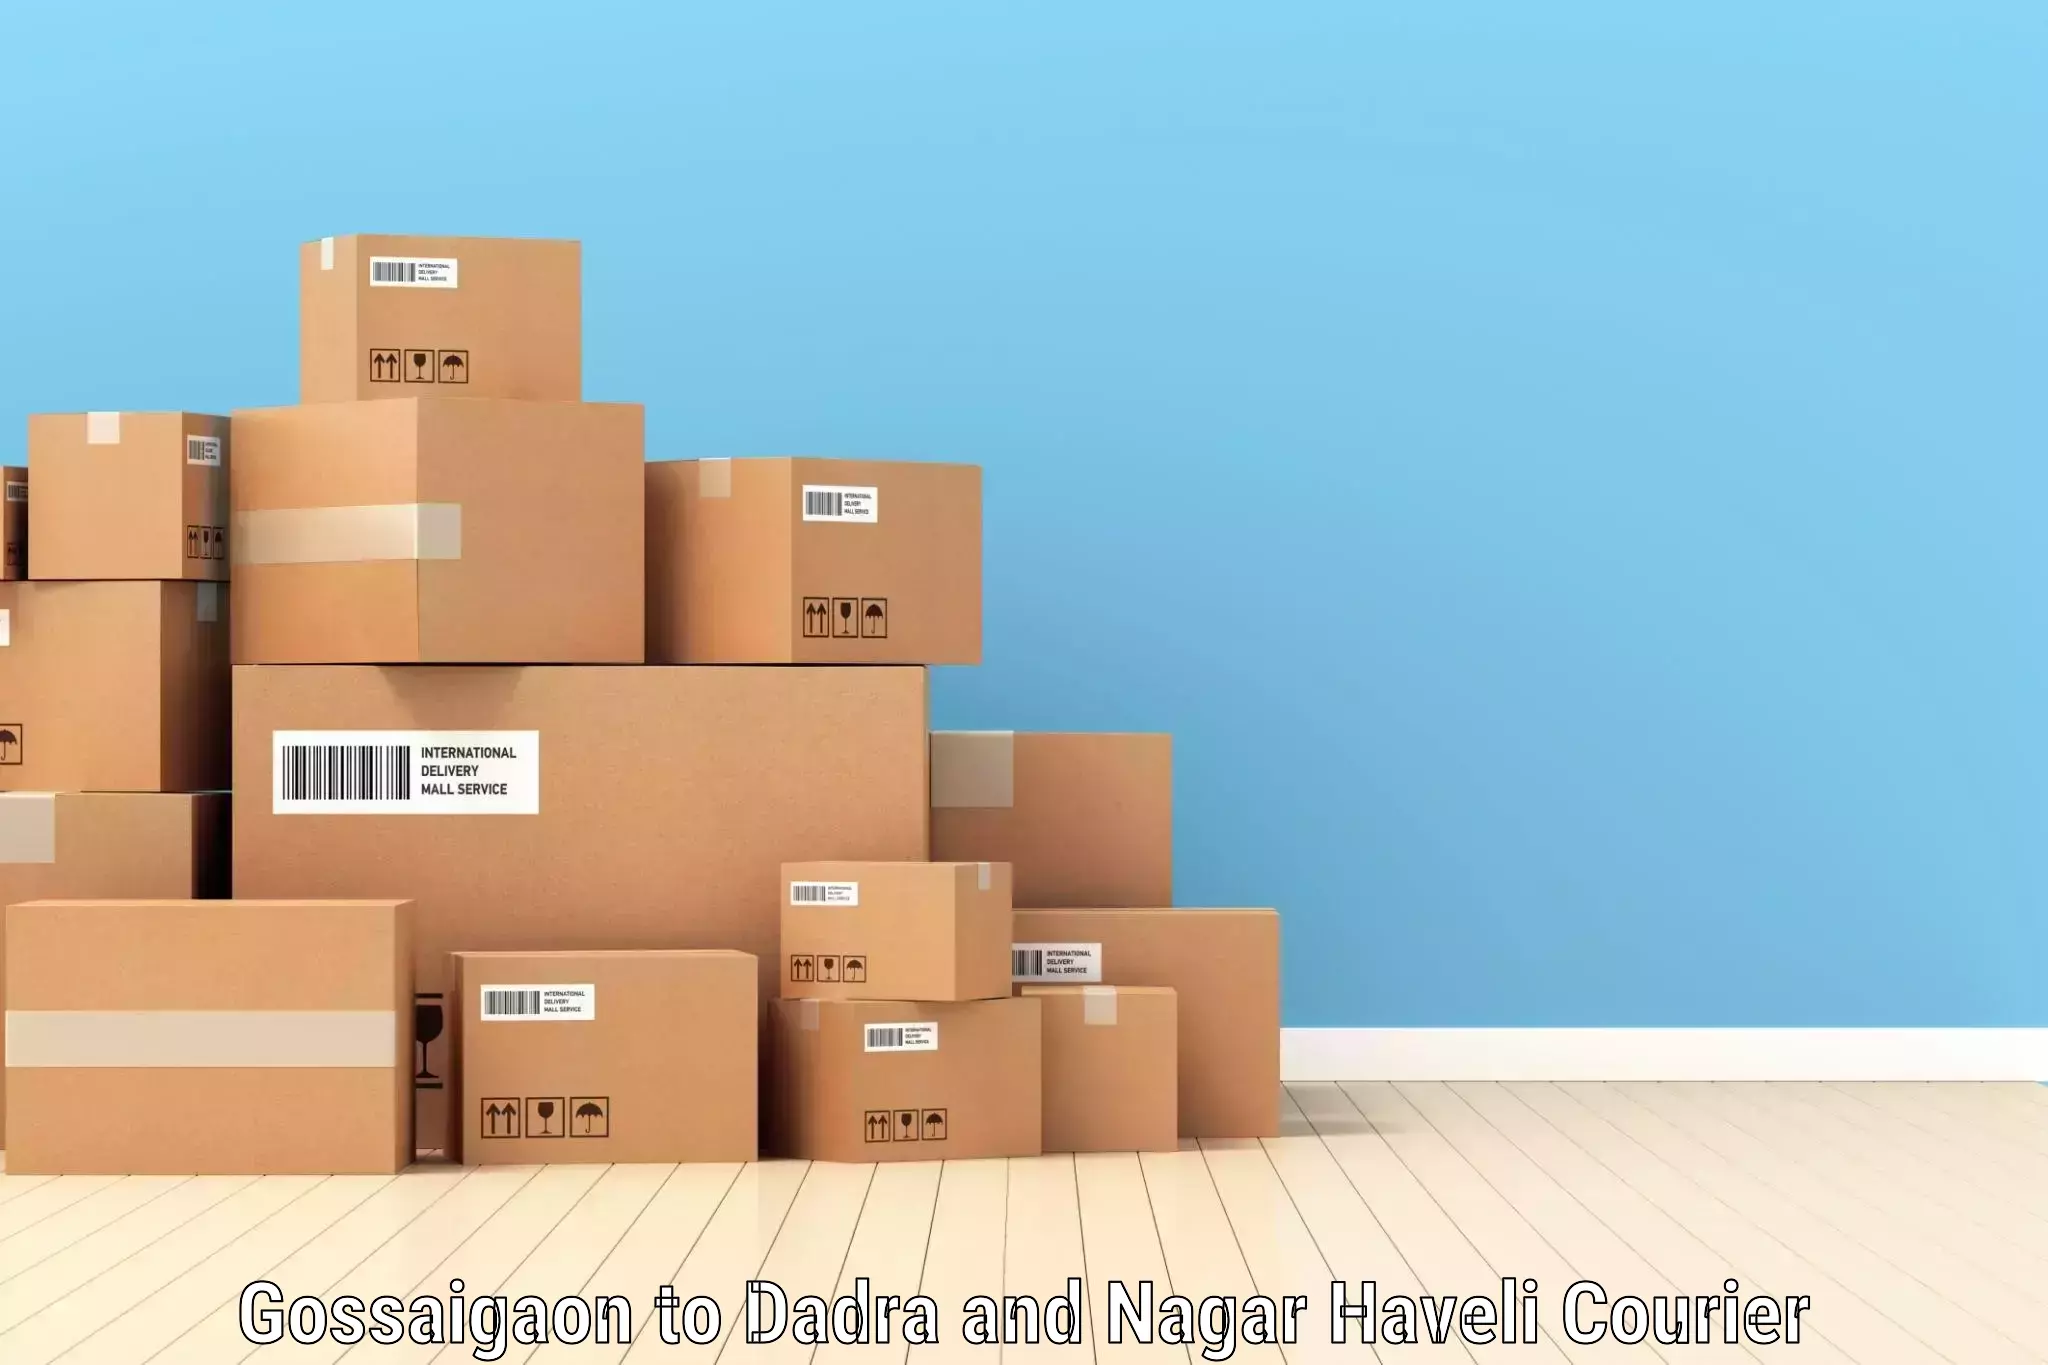 Package consolidation in Gossaigaon to Dadra and Nagar Haveli